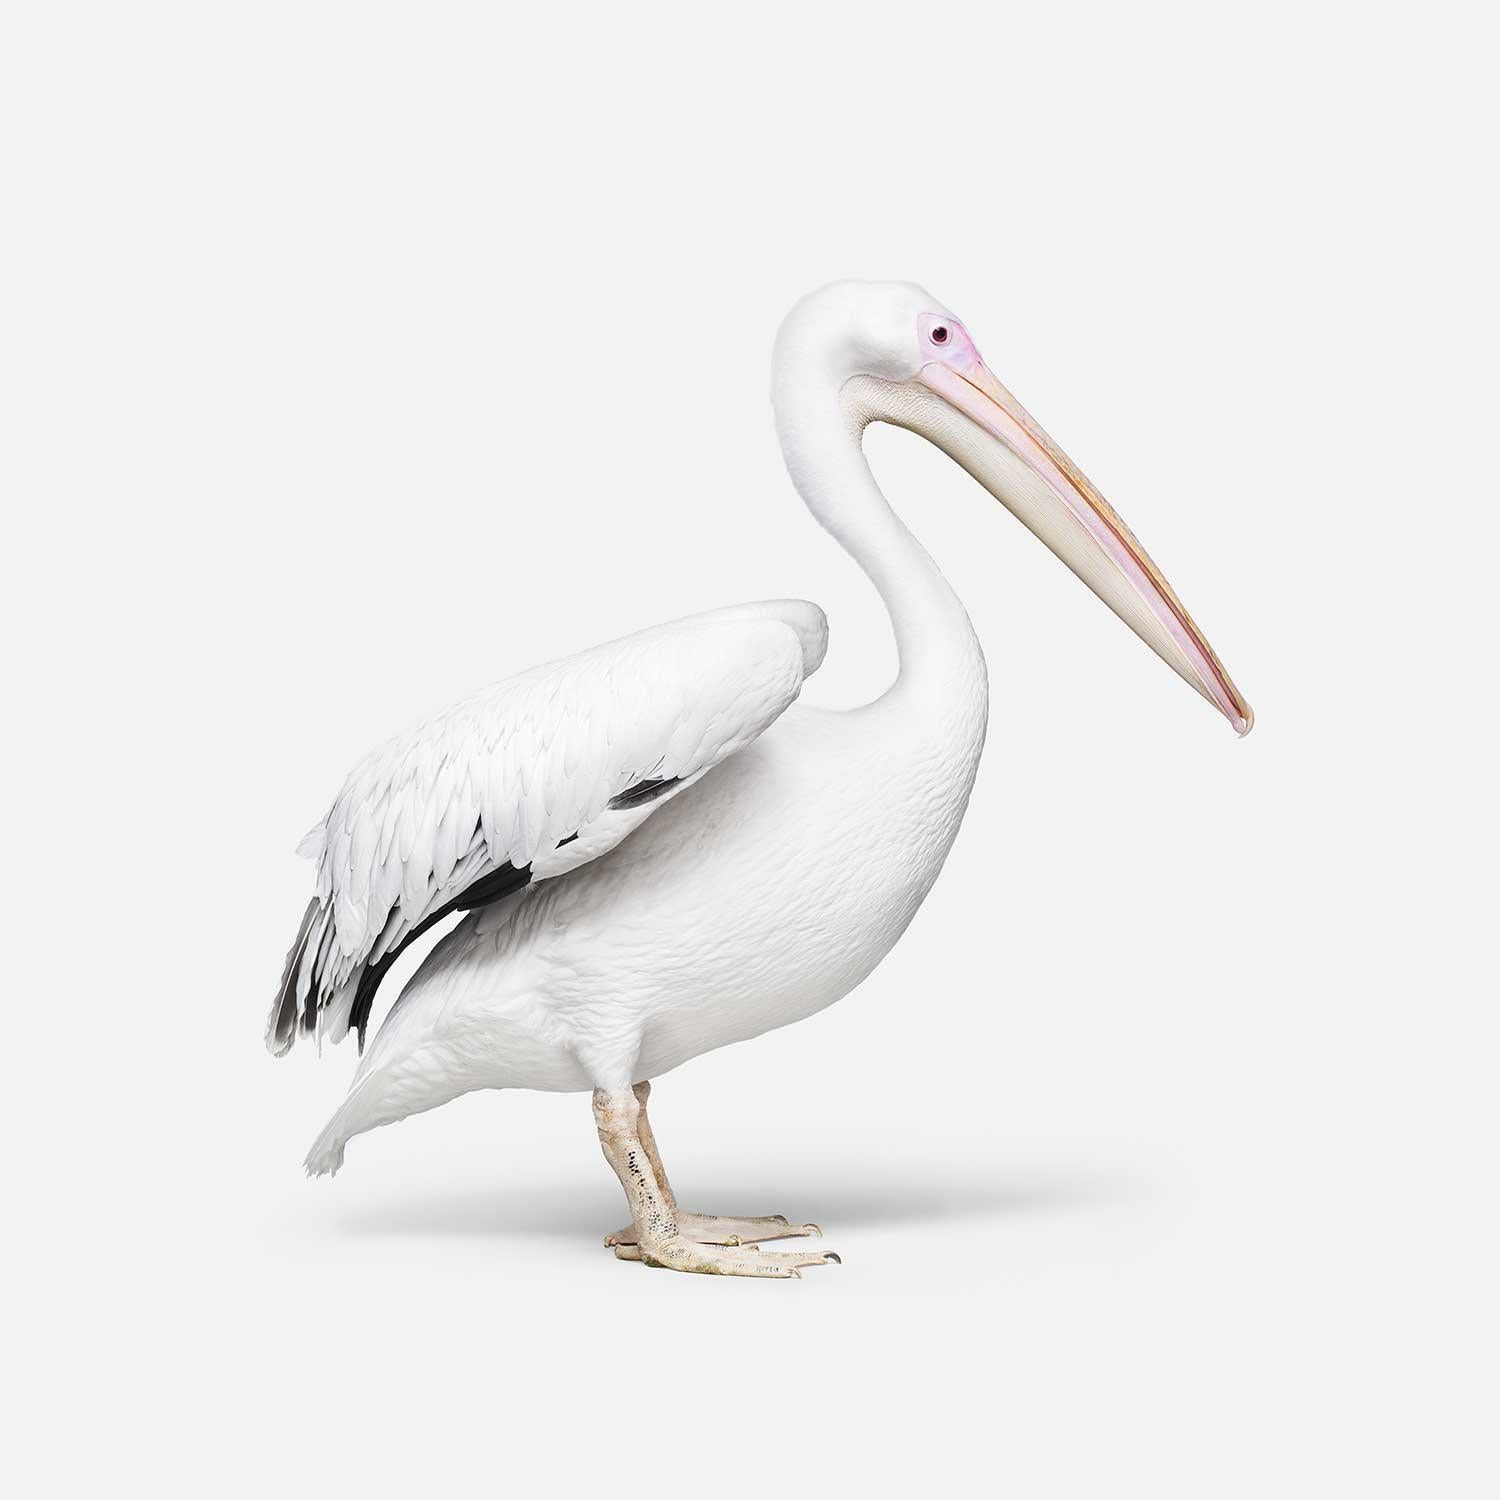 Randal Ford - Great White Pelican No. 1, Photography 2018, Printed After